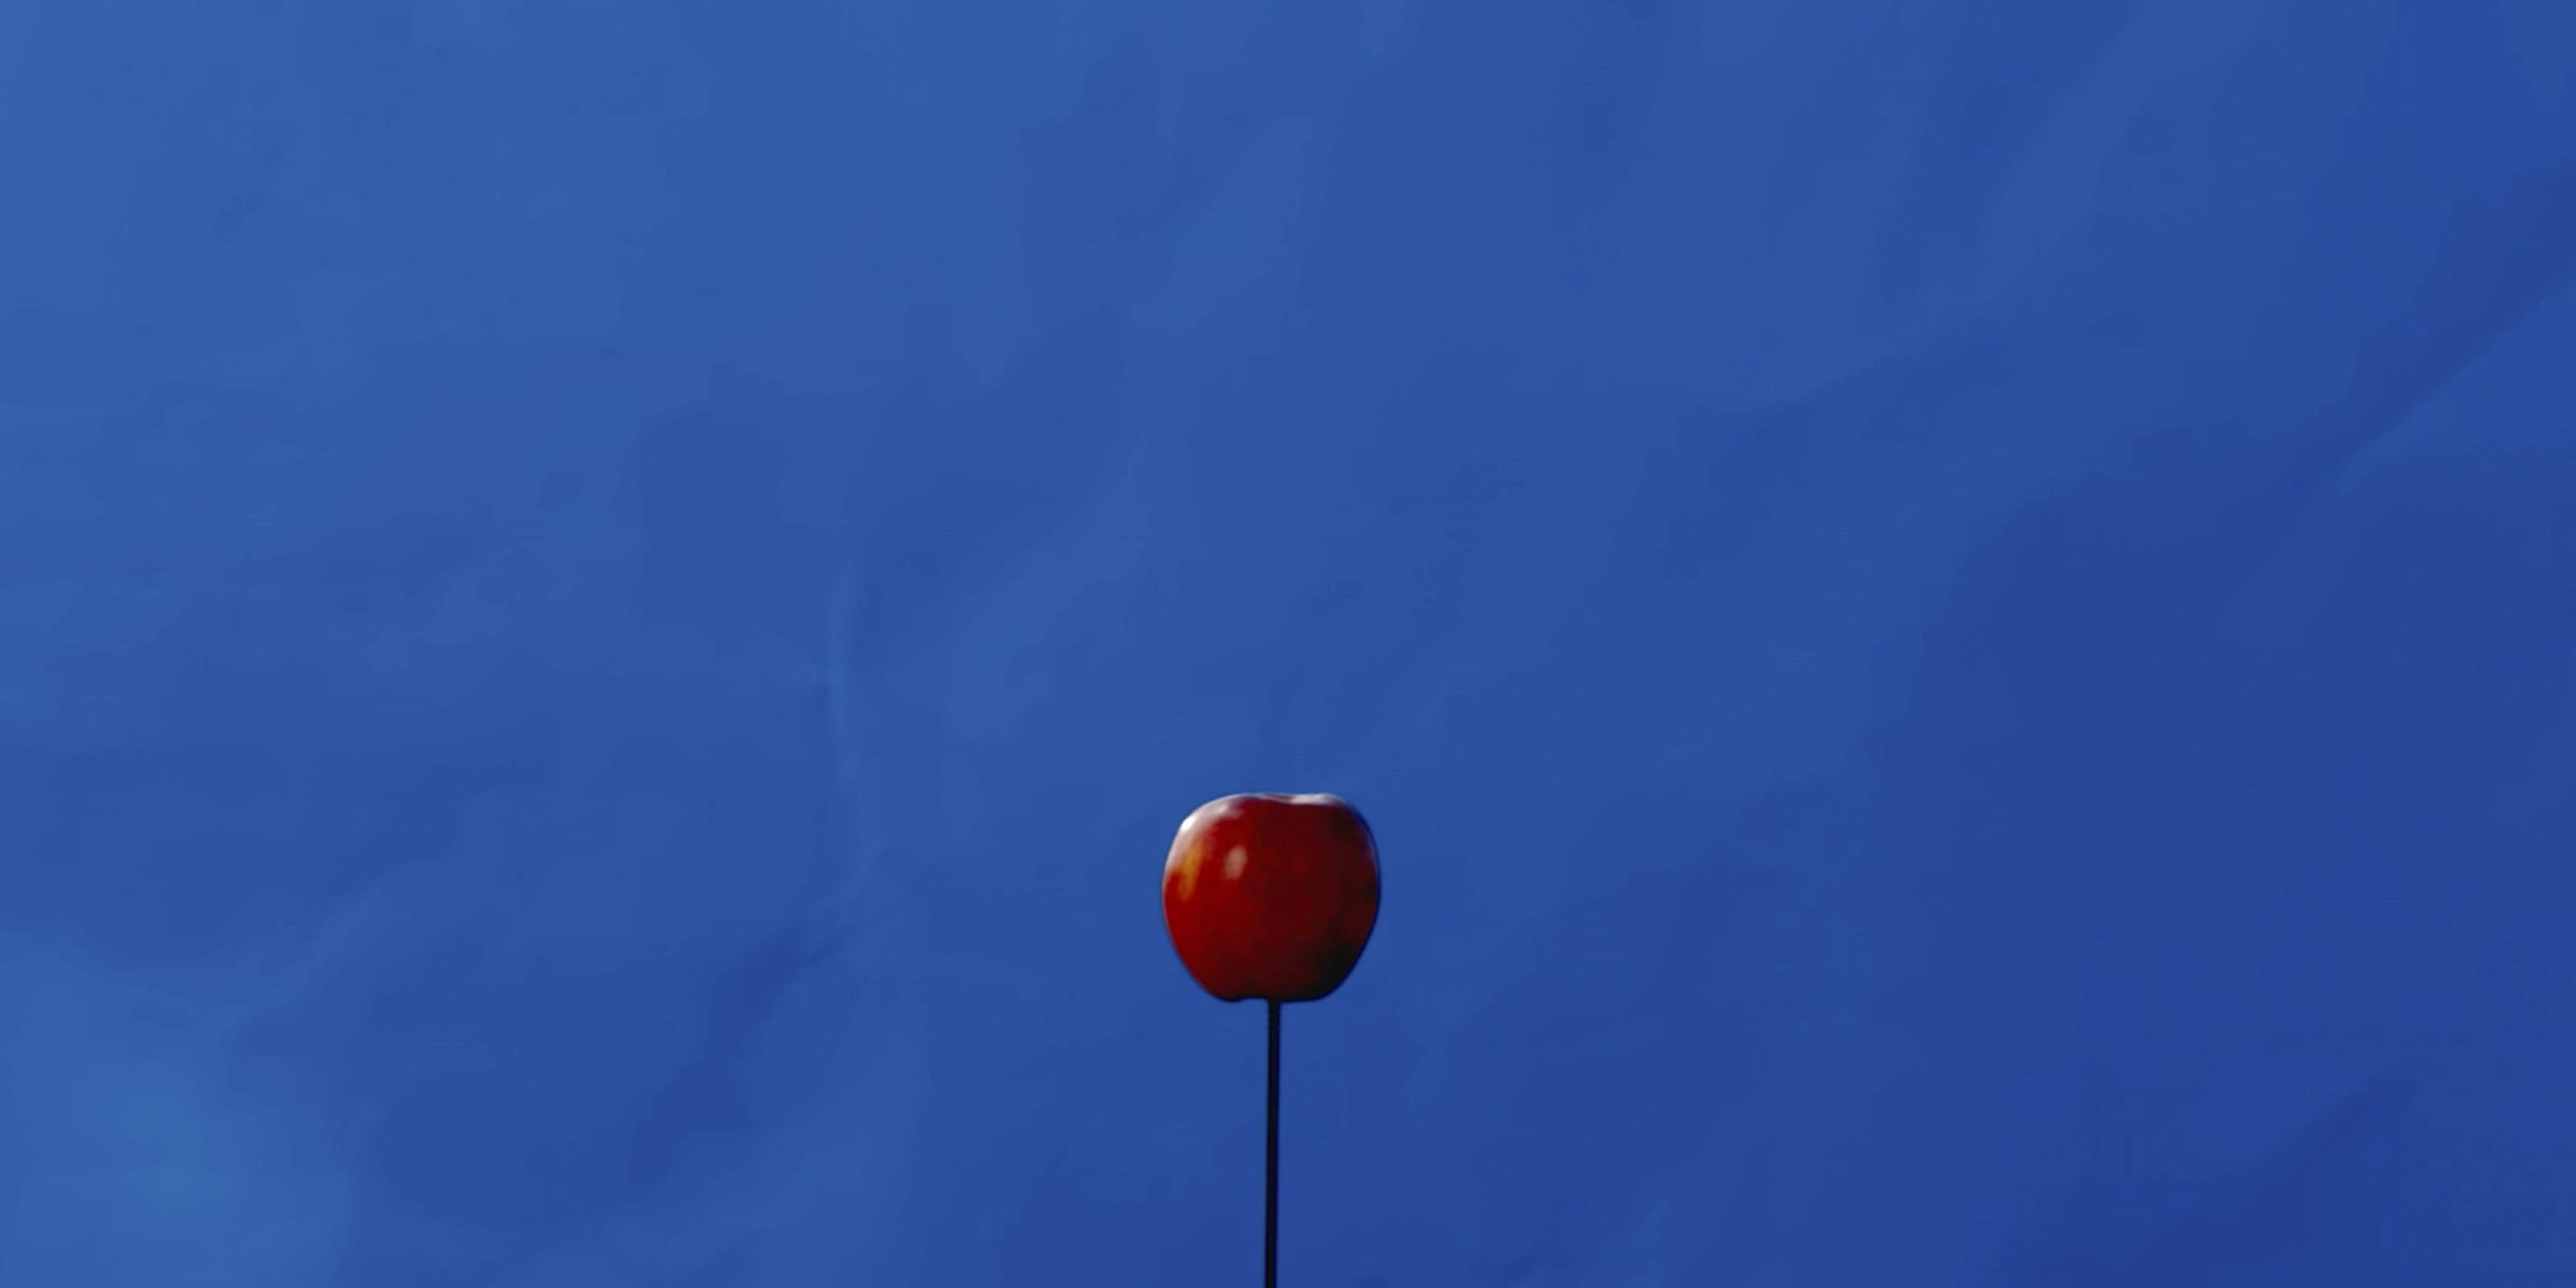 Cover image of the hero video showing an slow motion rubber bullet impacting an apple.